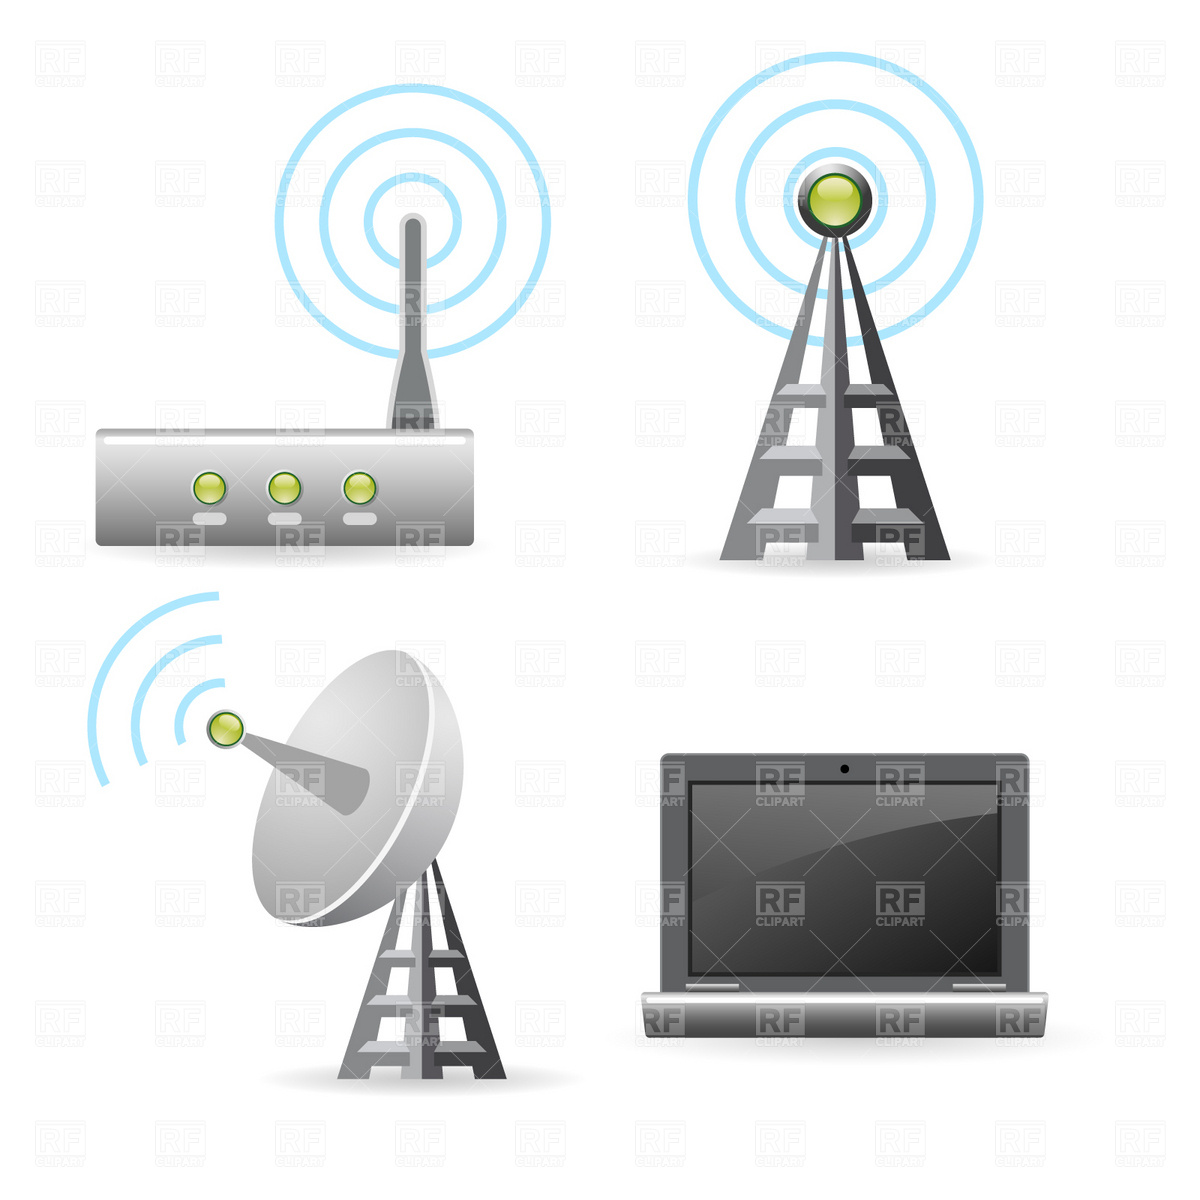 Clip Art Of Technology Devices Clipart.